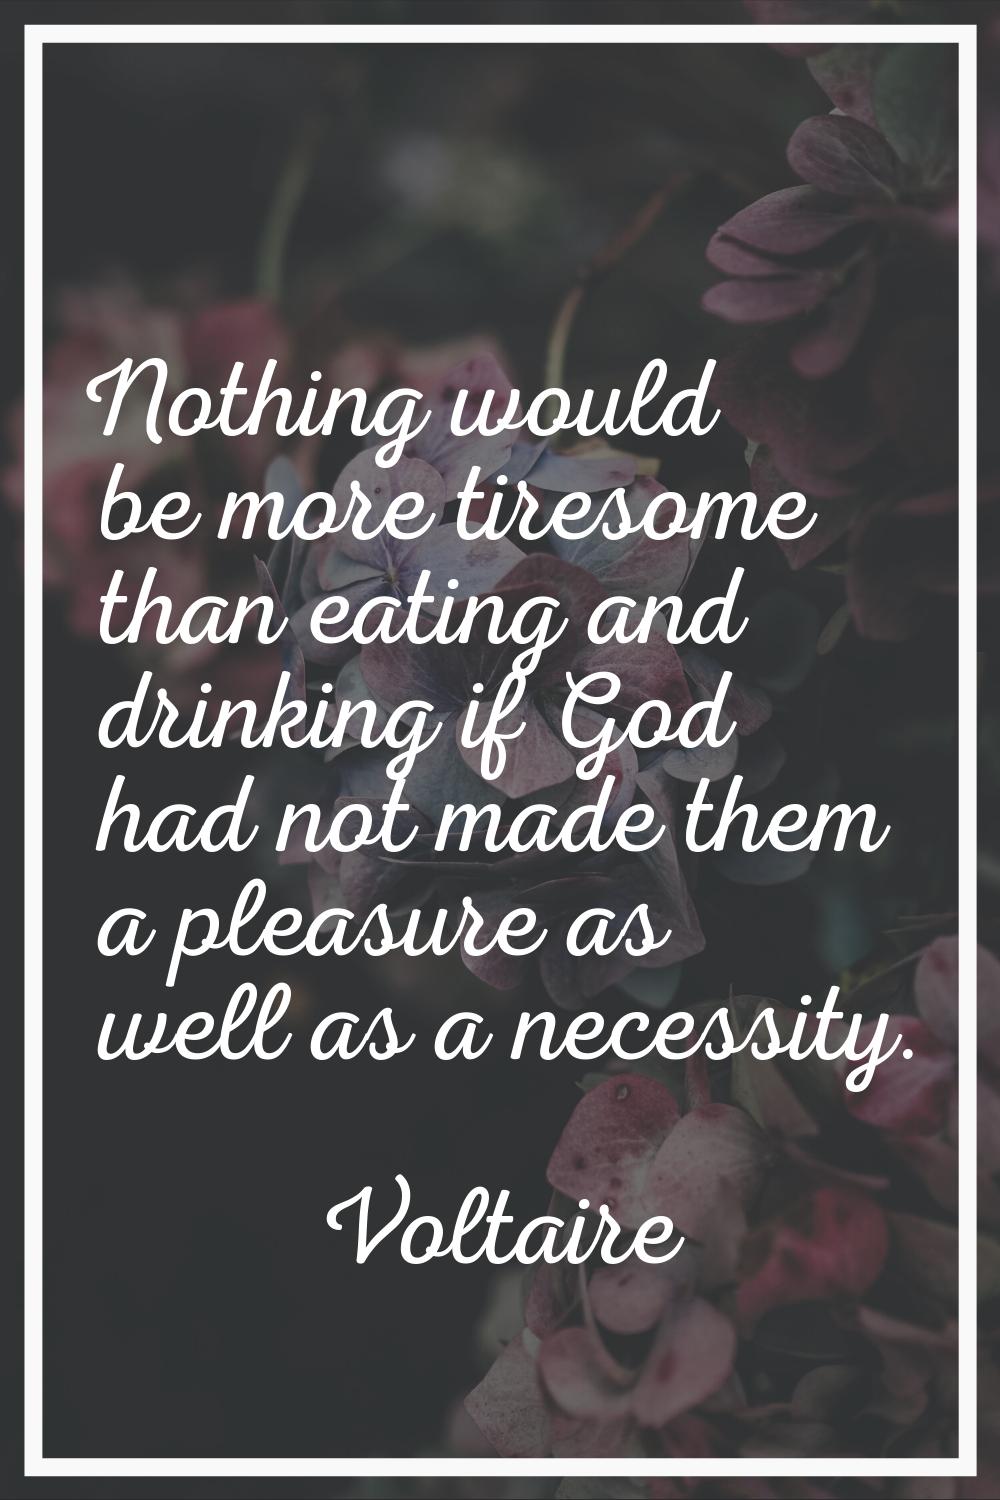 Nothing would be more tiresome than eating and drinking if God had not made them a pleasure as well